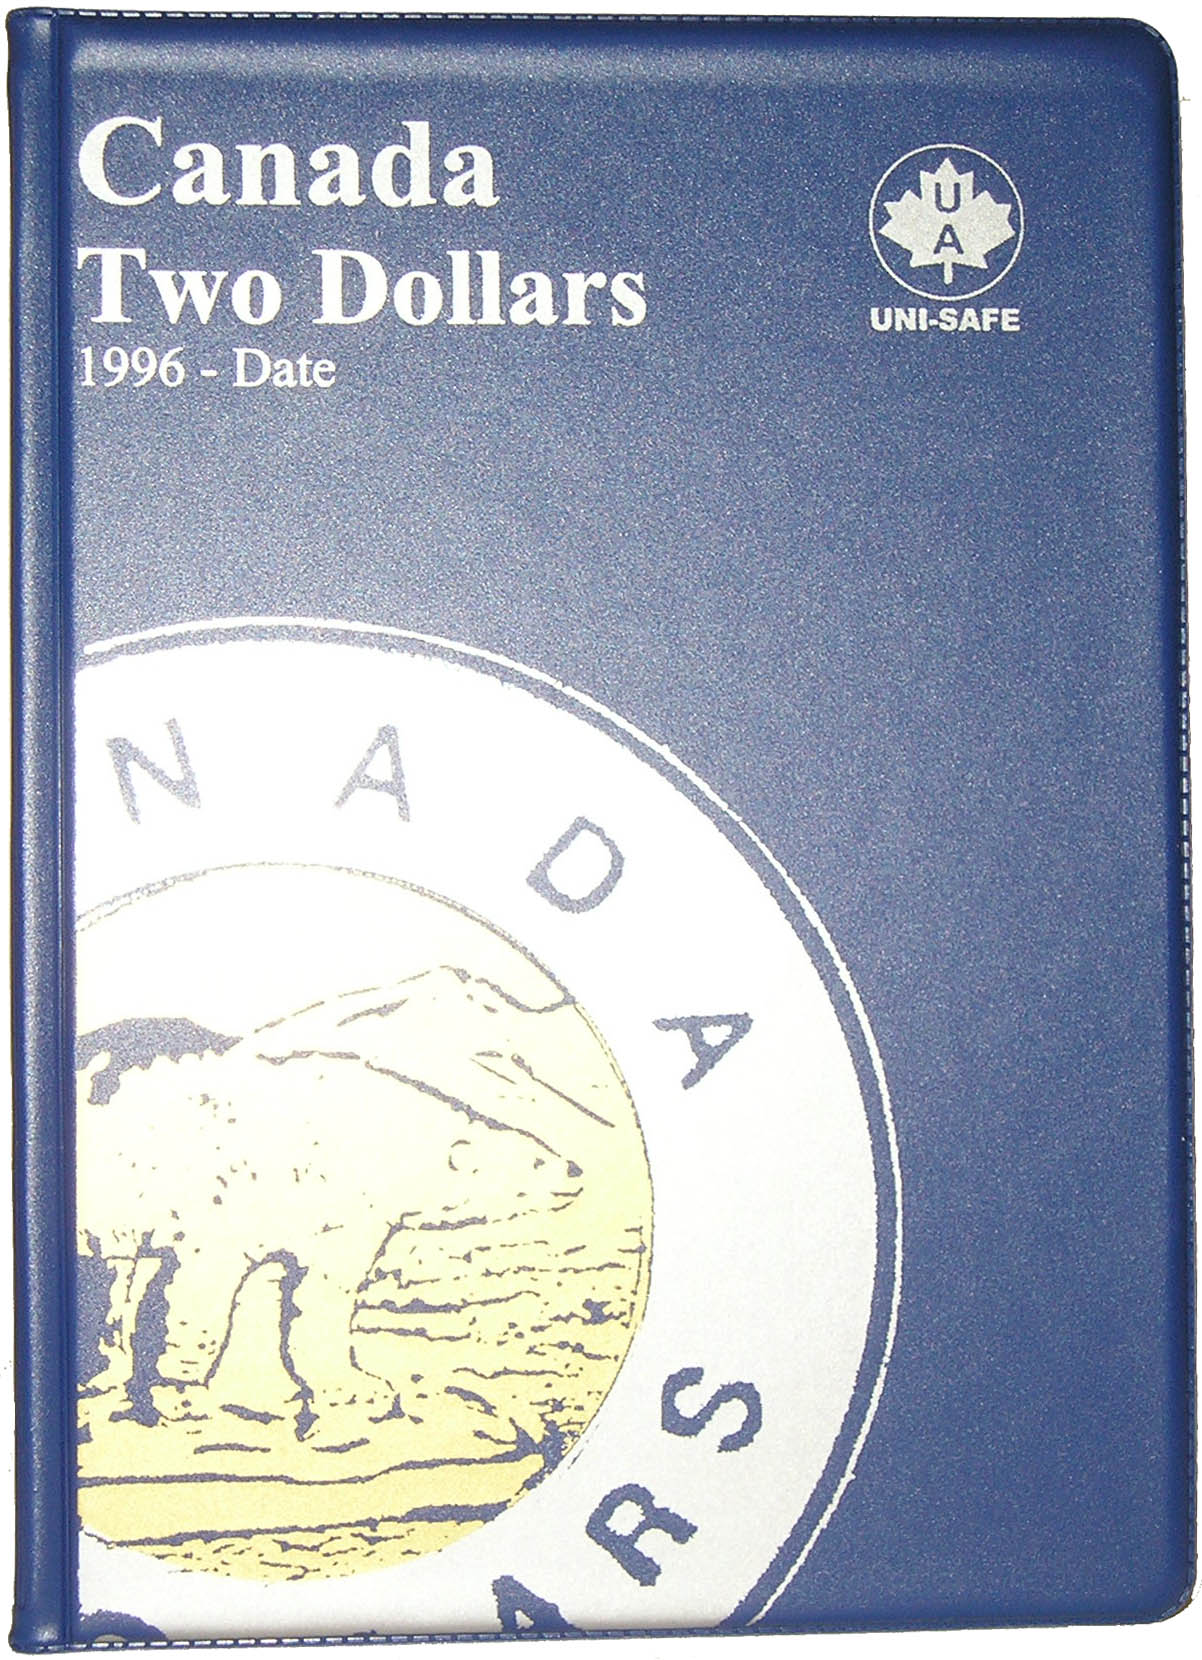 Uni-Safe Canadian Canada 50 Cents Coin Collection Album Folder 1984-Date 